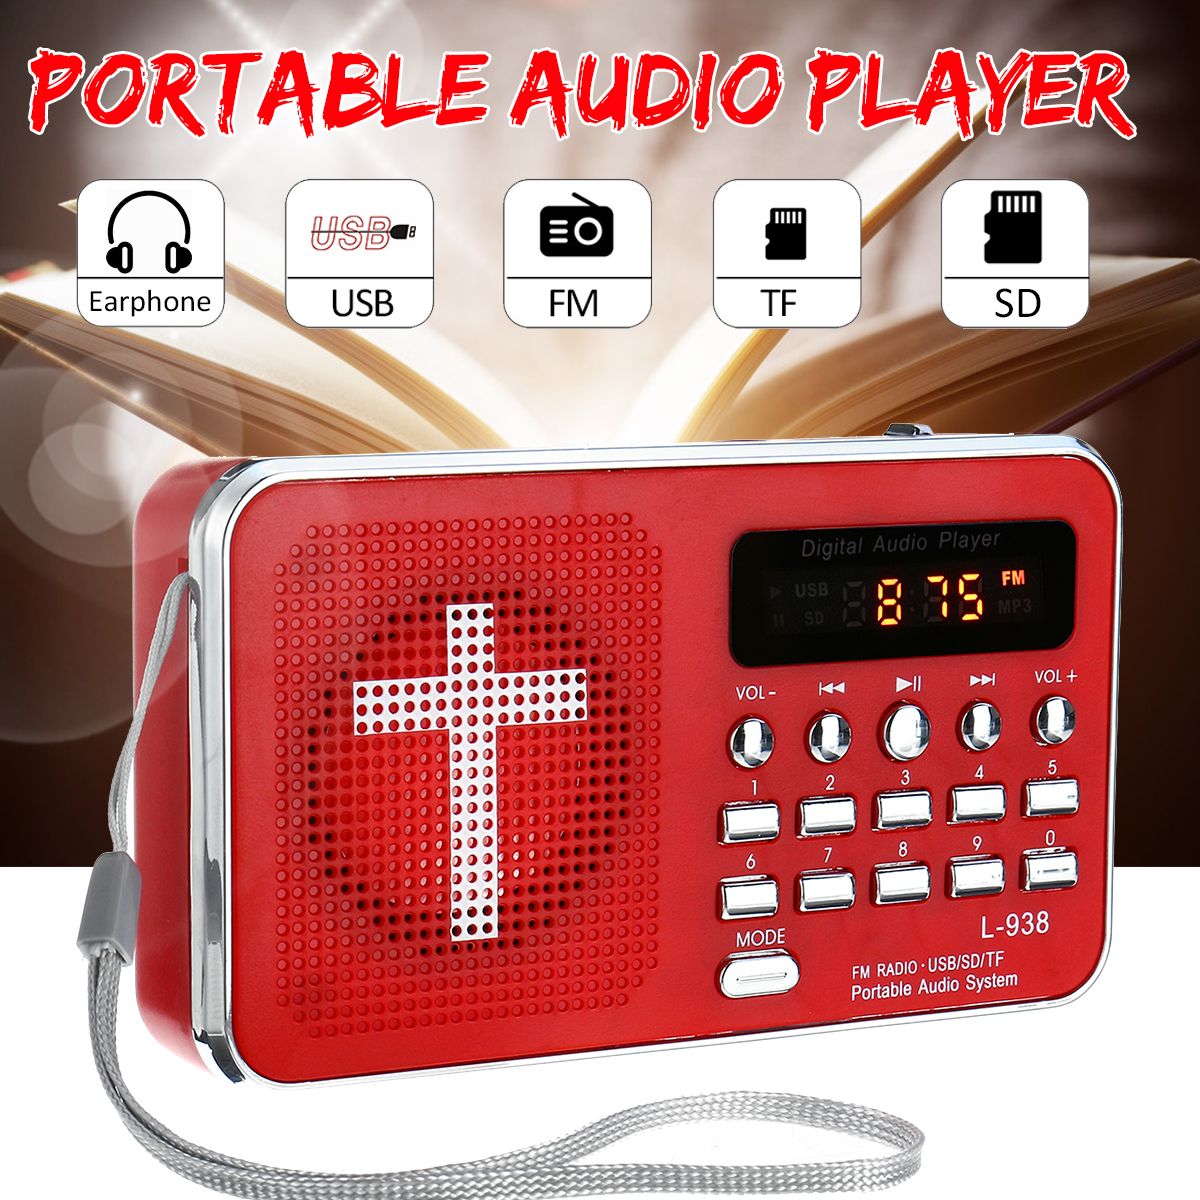 Bible-AUX-U-disk-TF-SD-Card-Audio-MP3-Music-Player-Portable-Mini-FM-Radio-Speakers-For-Elders-Gift-1430278